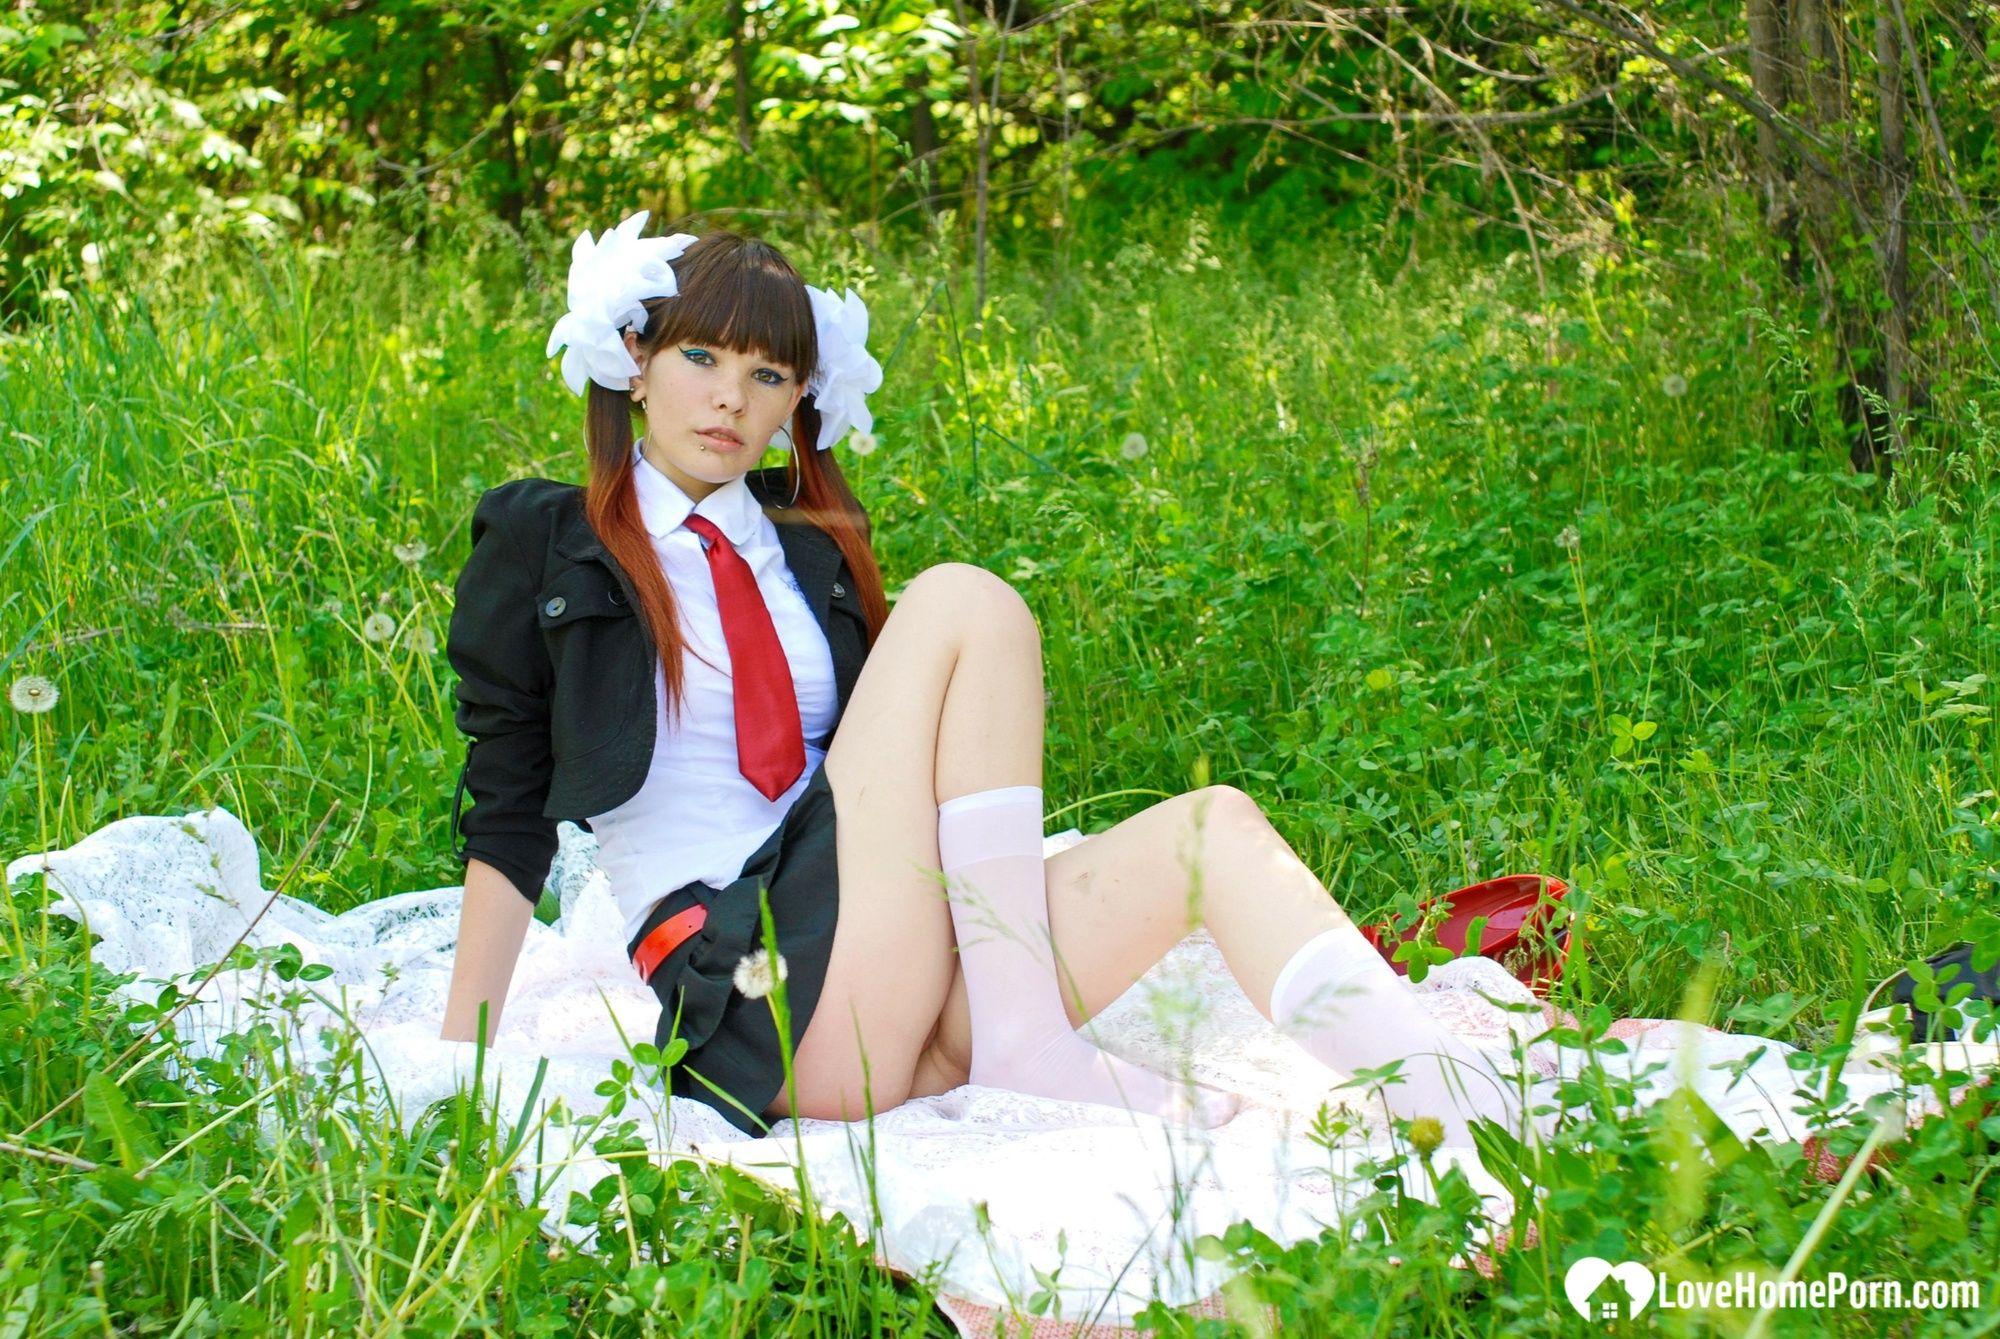 Schoolgirl turns a picnic into a teasing session #45